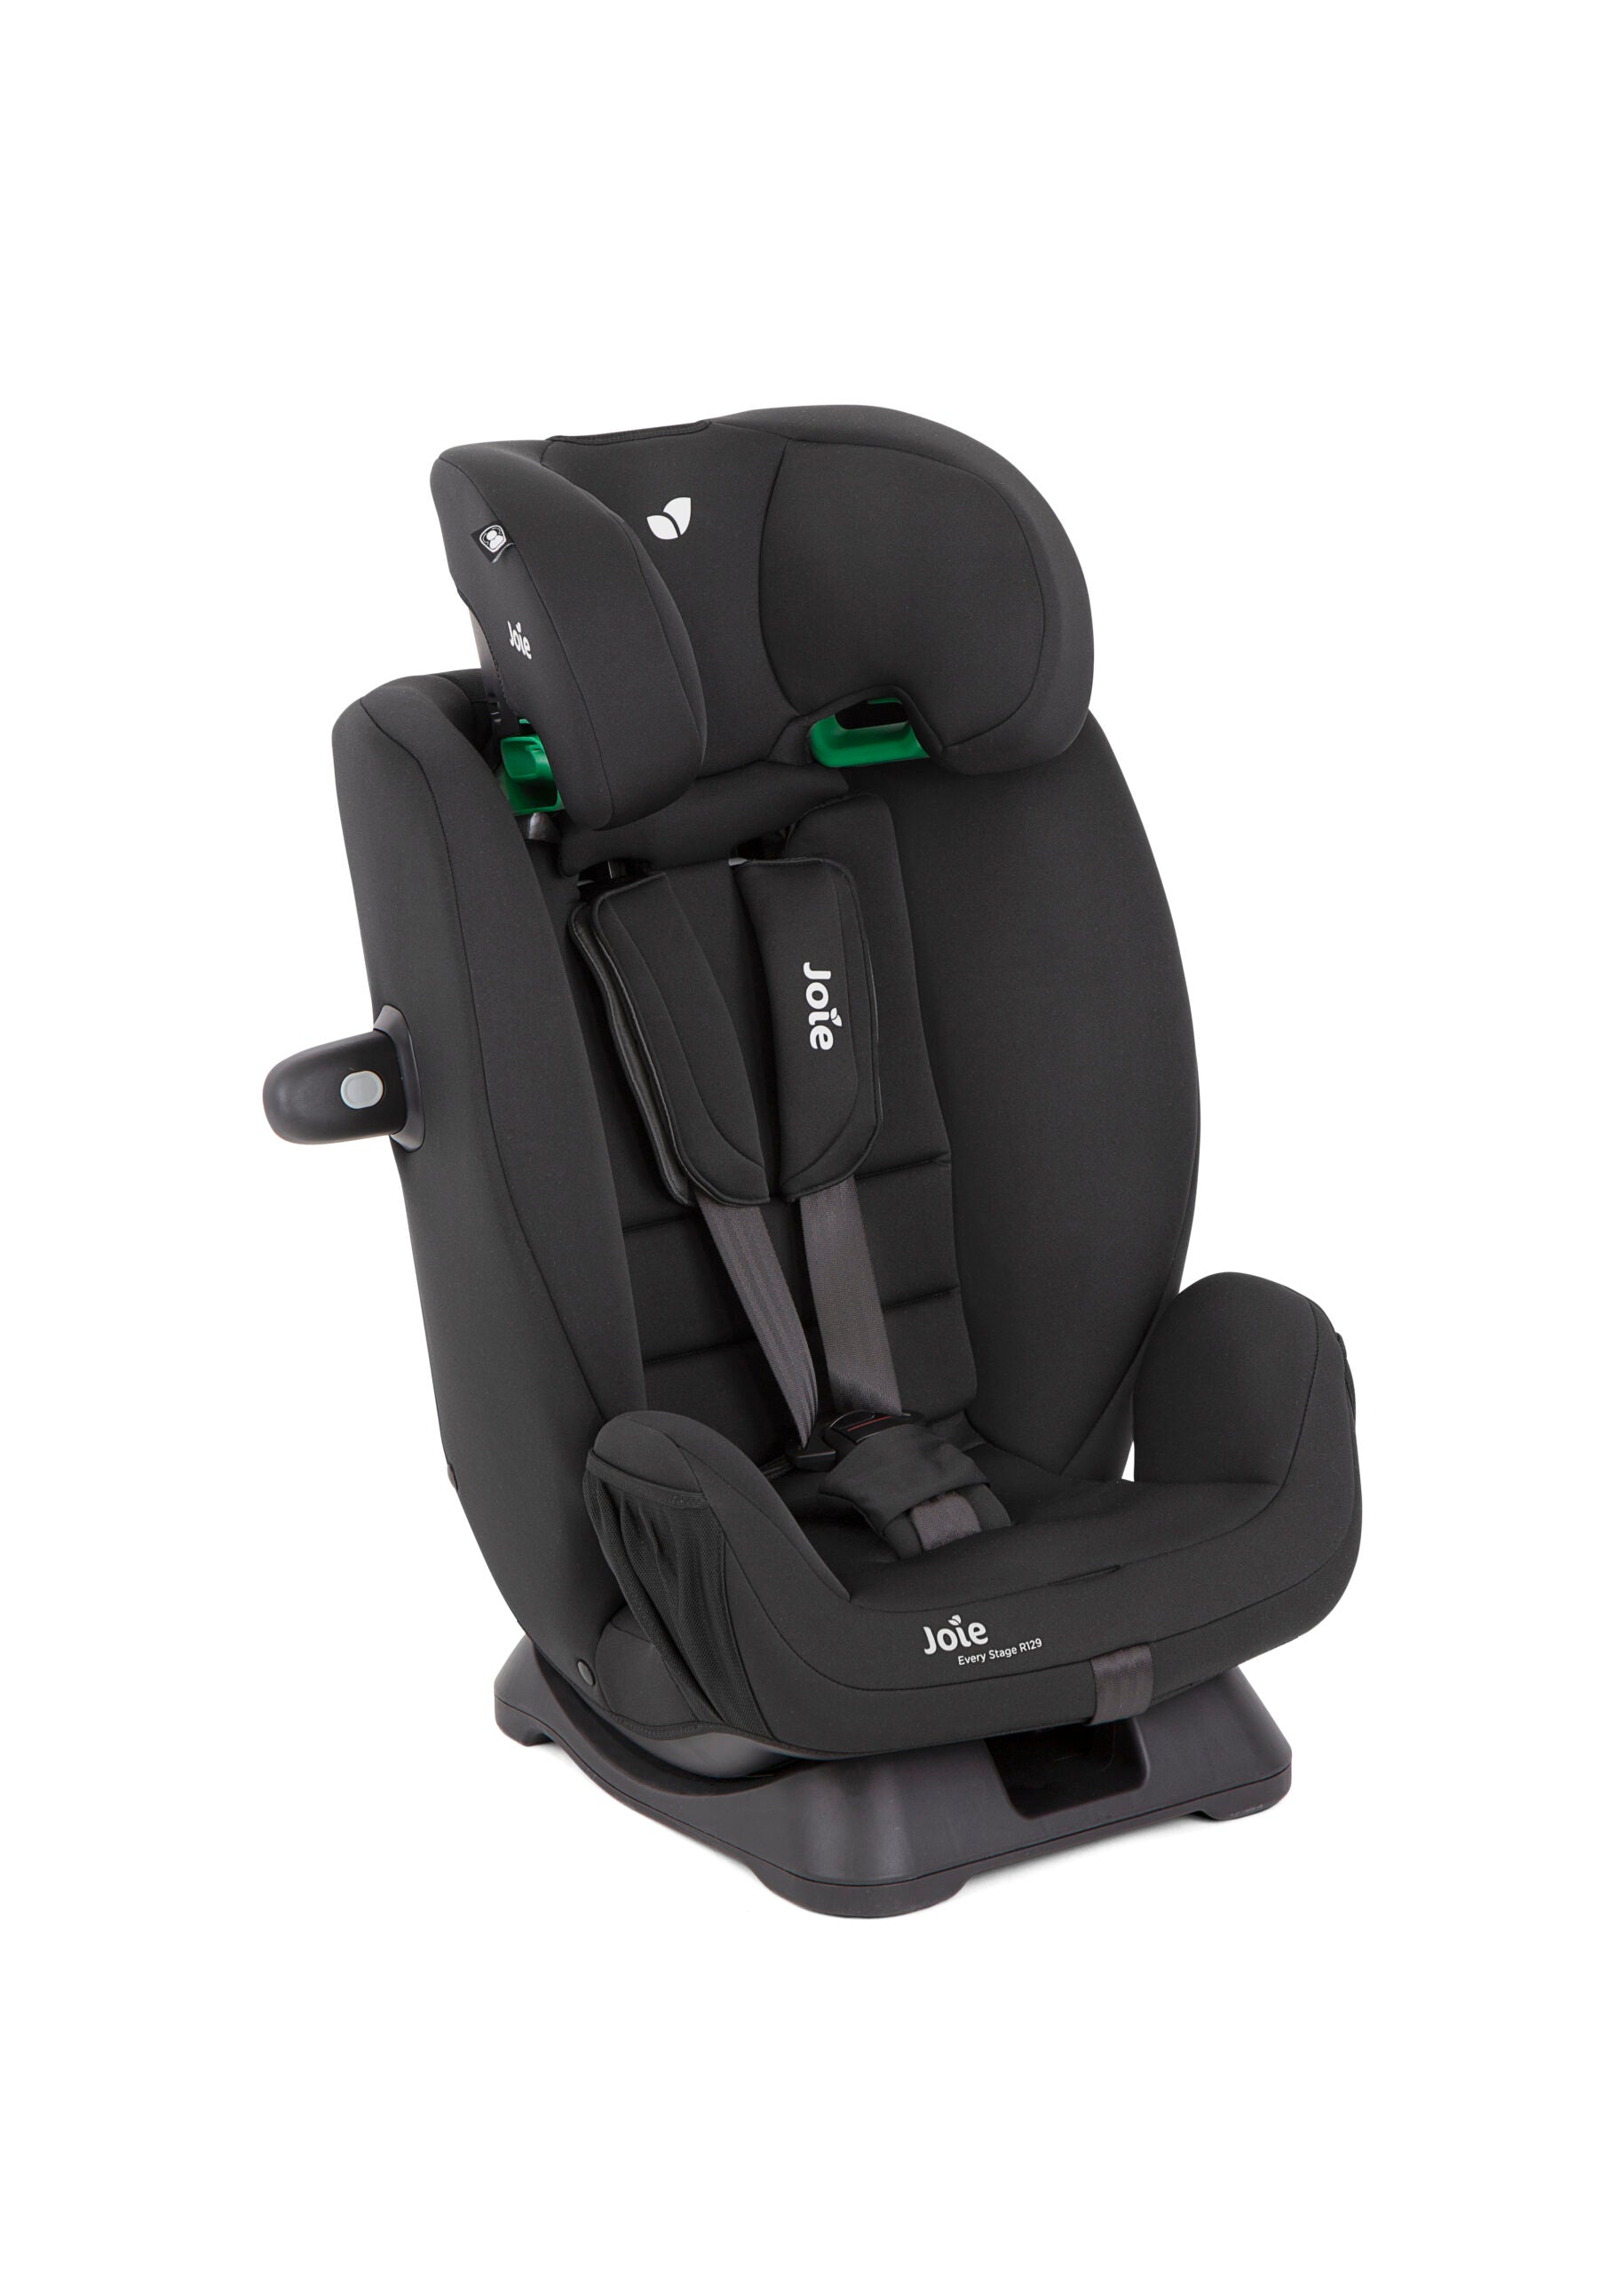 Joie combination car seats Every Stage R129 - Shale C2117AASHA000